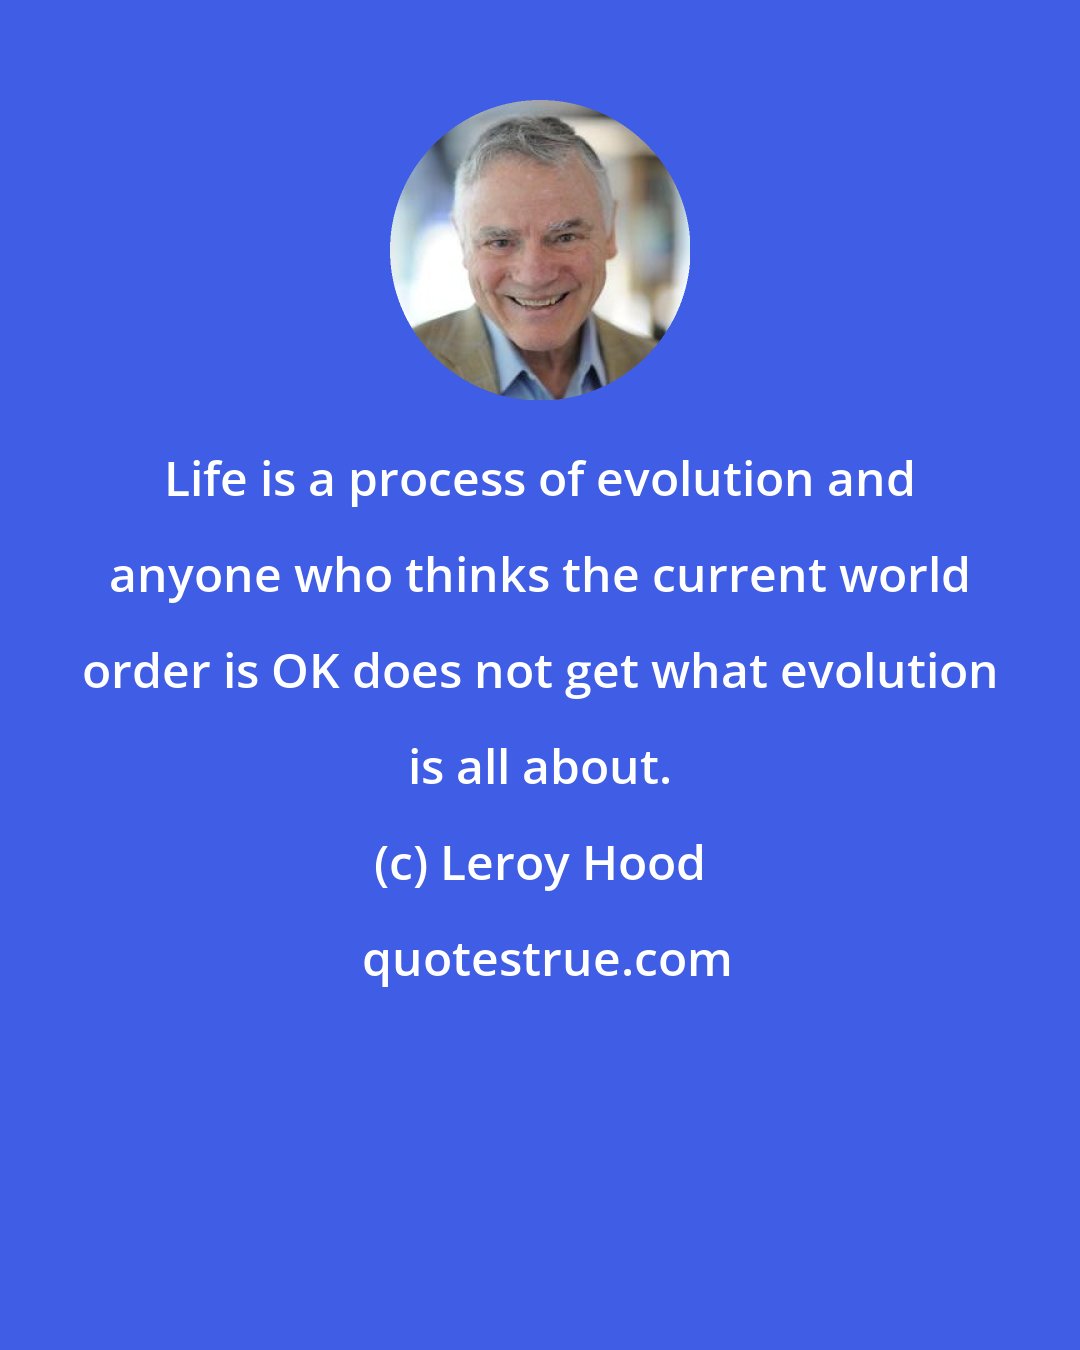 Leroy Hood: Life is a process of evolution and anyone who thinks the current world order is OK does not get what evolution is all about.